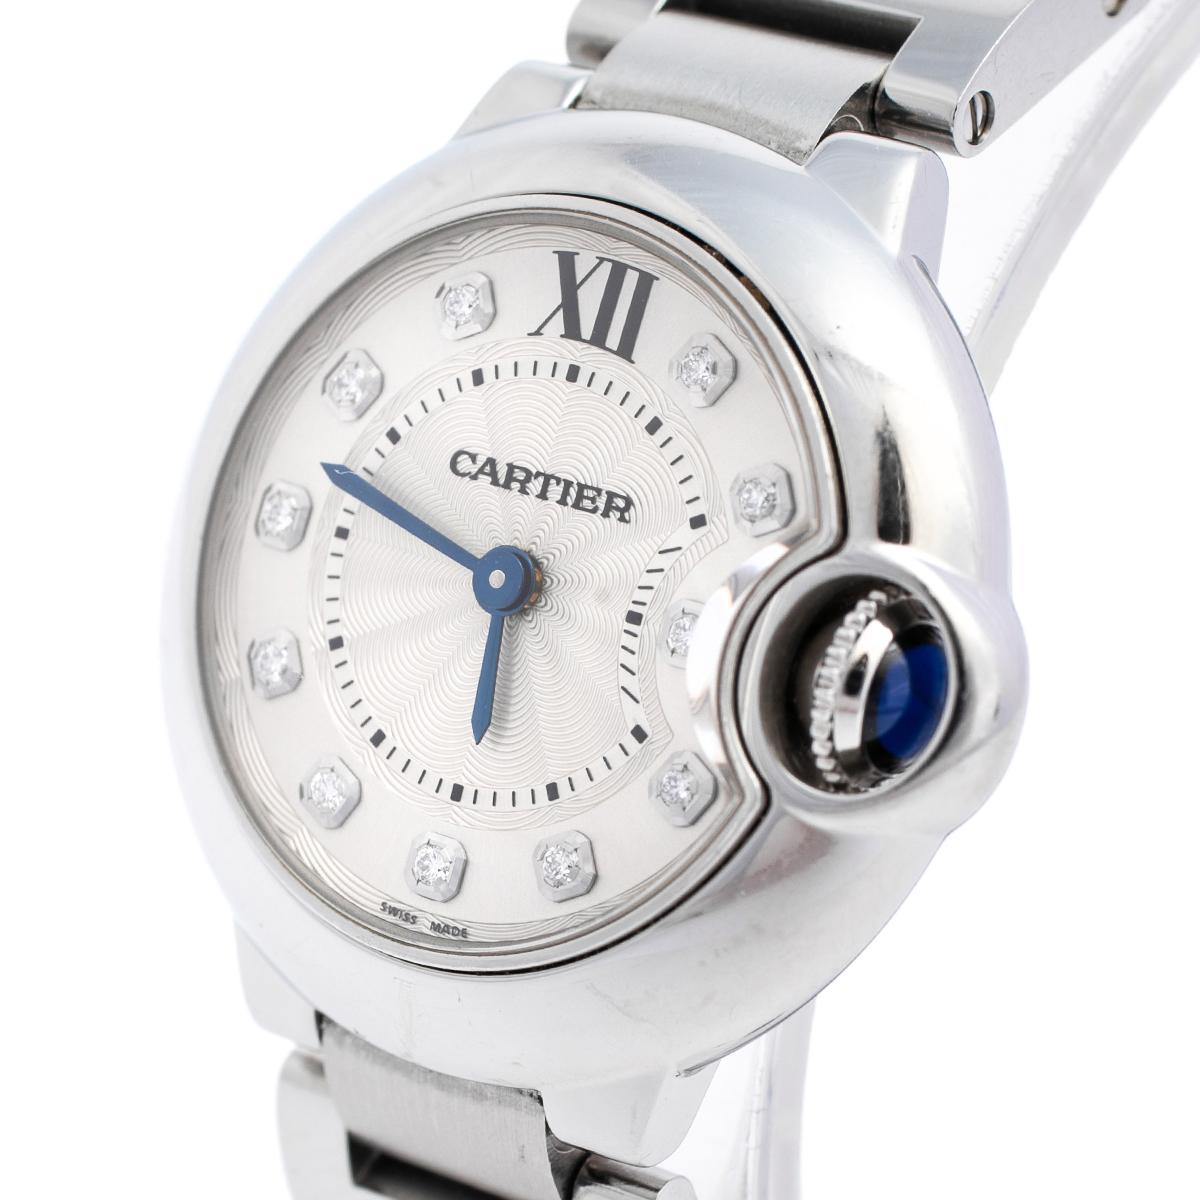 This elegant timepiece from Cartier takes its name, Ballon Bleu, from the fluted crown set with the blue spinel cabochon, which appears floating like a balloon, lying on the side. Crafted with excellent precision, the watch imparts an understated